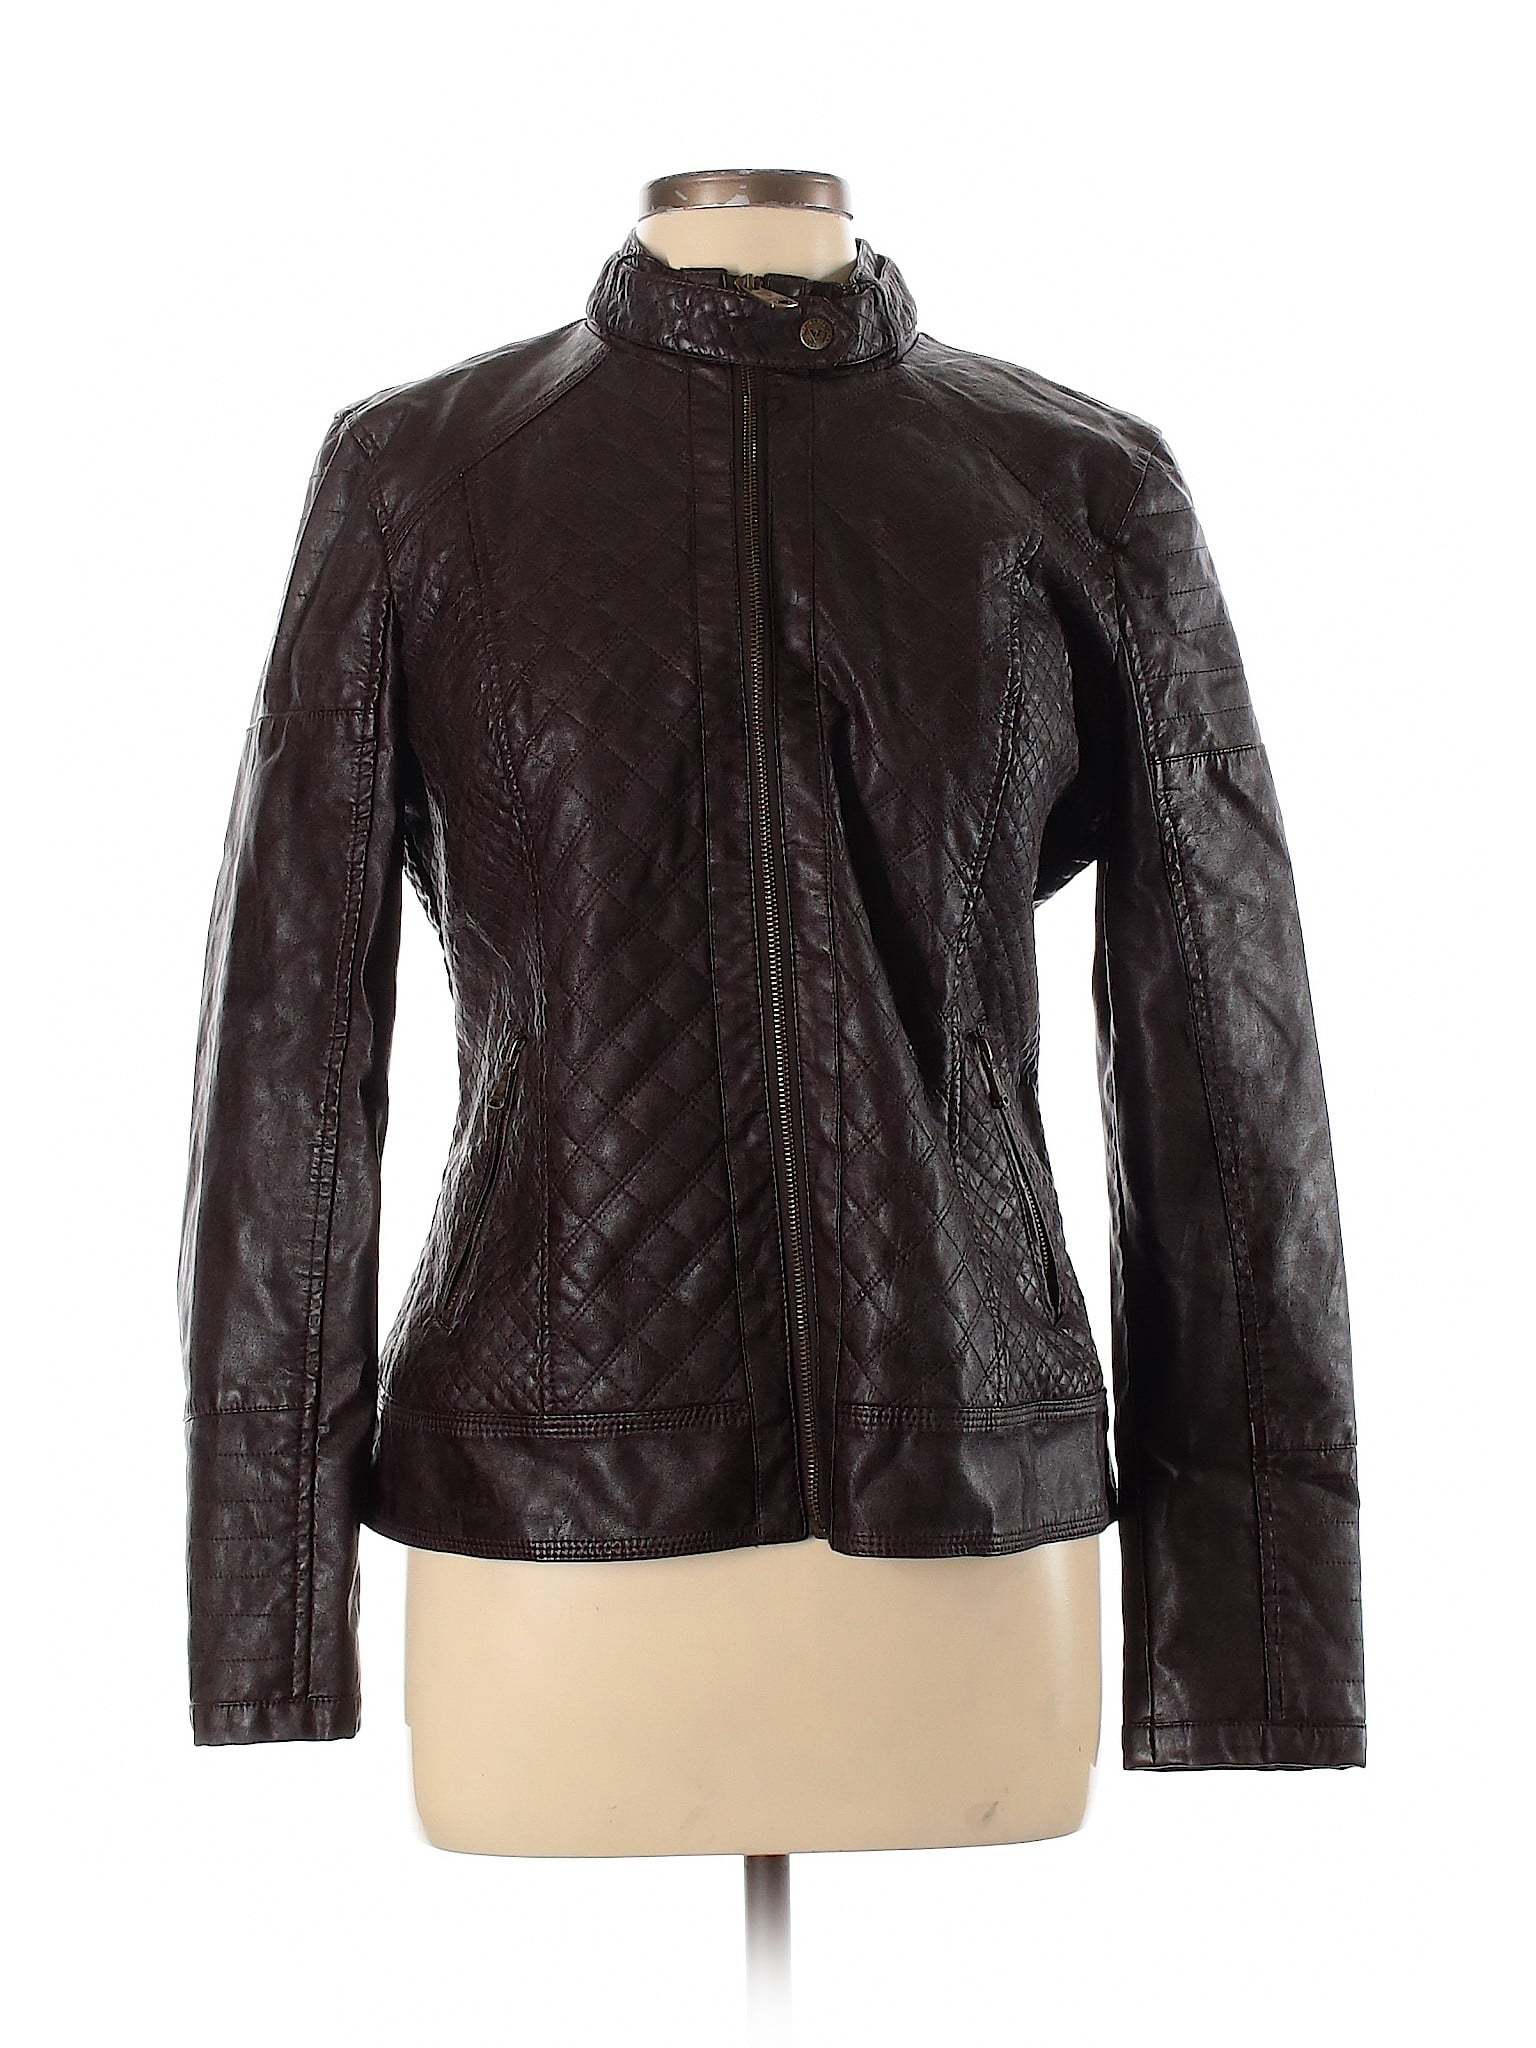 GUESS - Pre-Owned Guess Women's Size L Faux Leather Jacket - Walmart ...